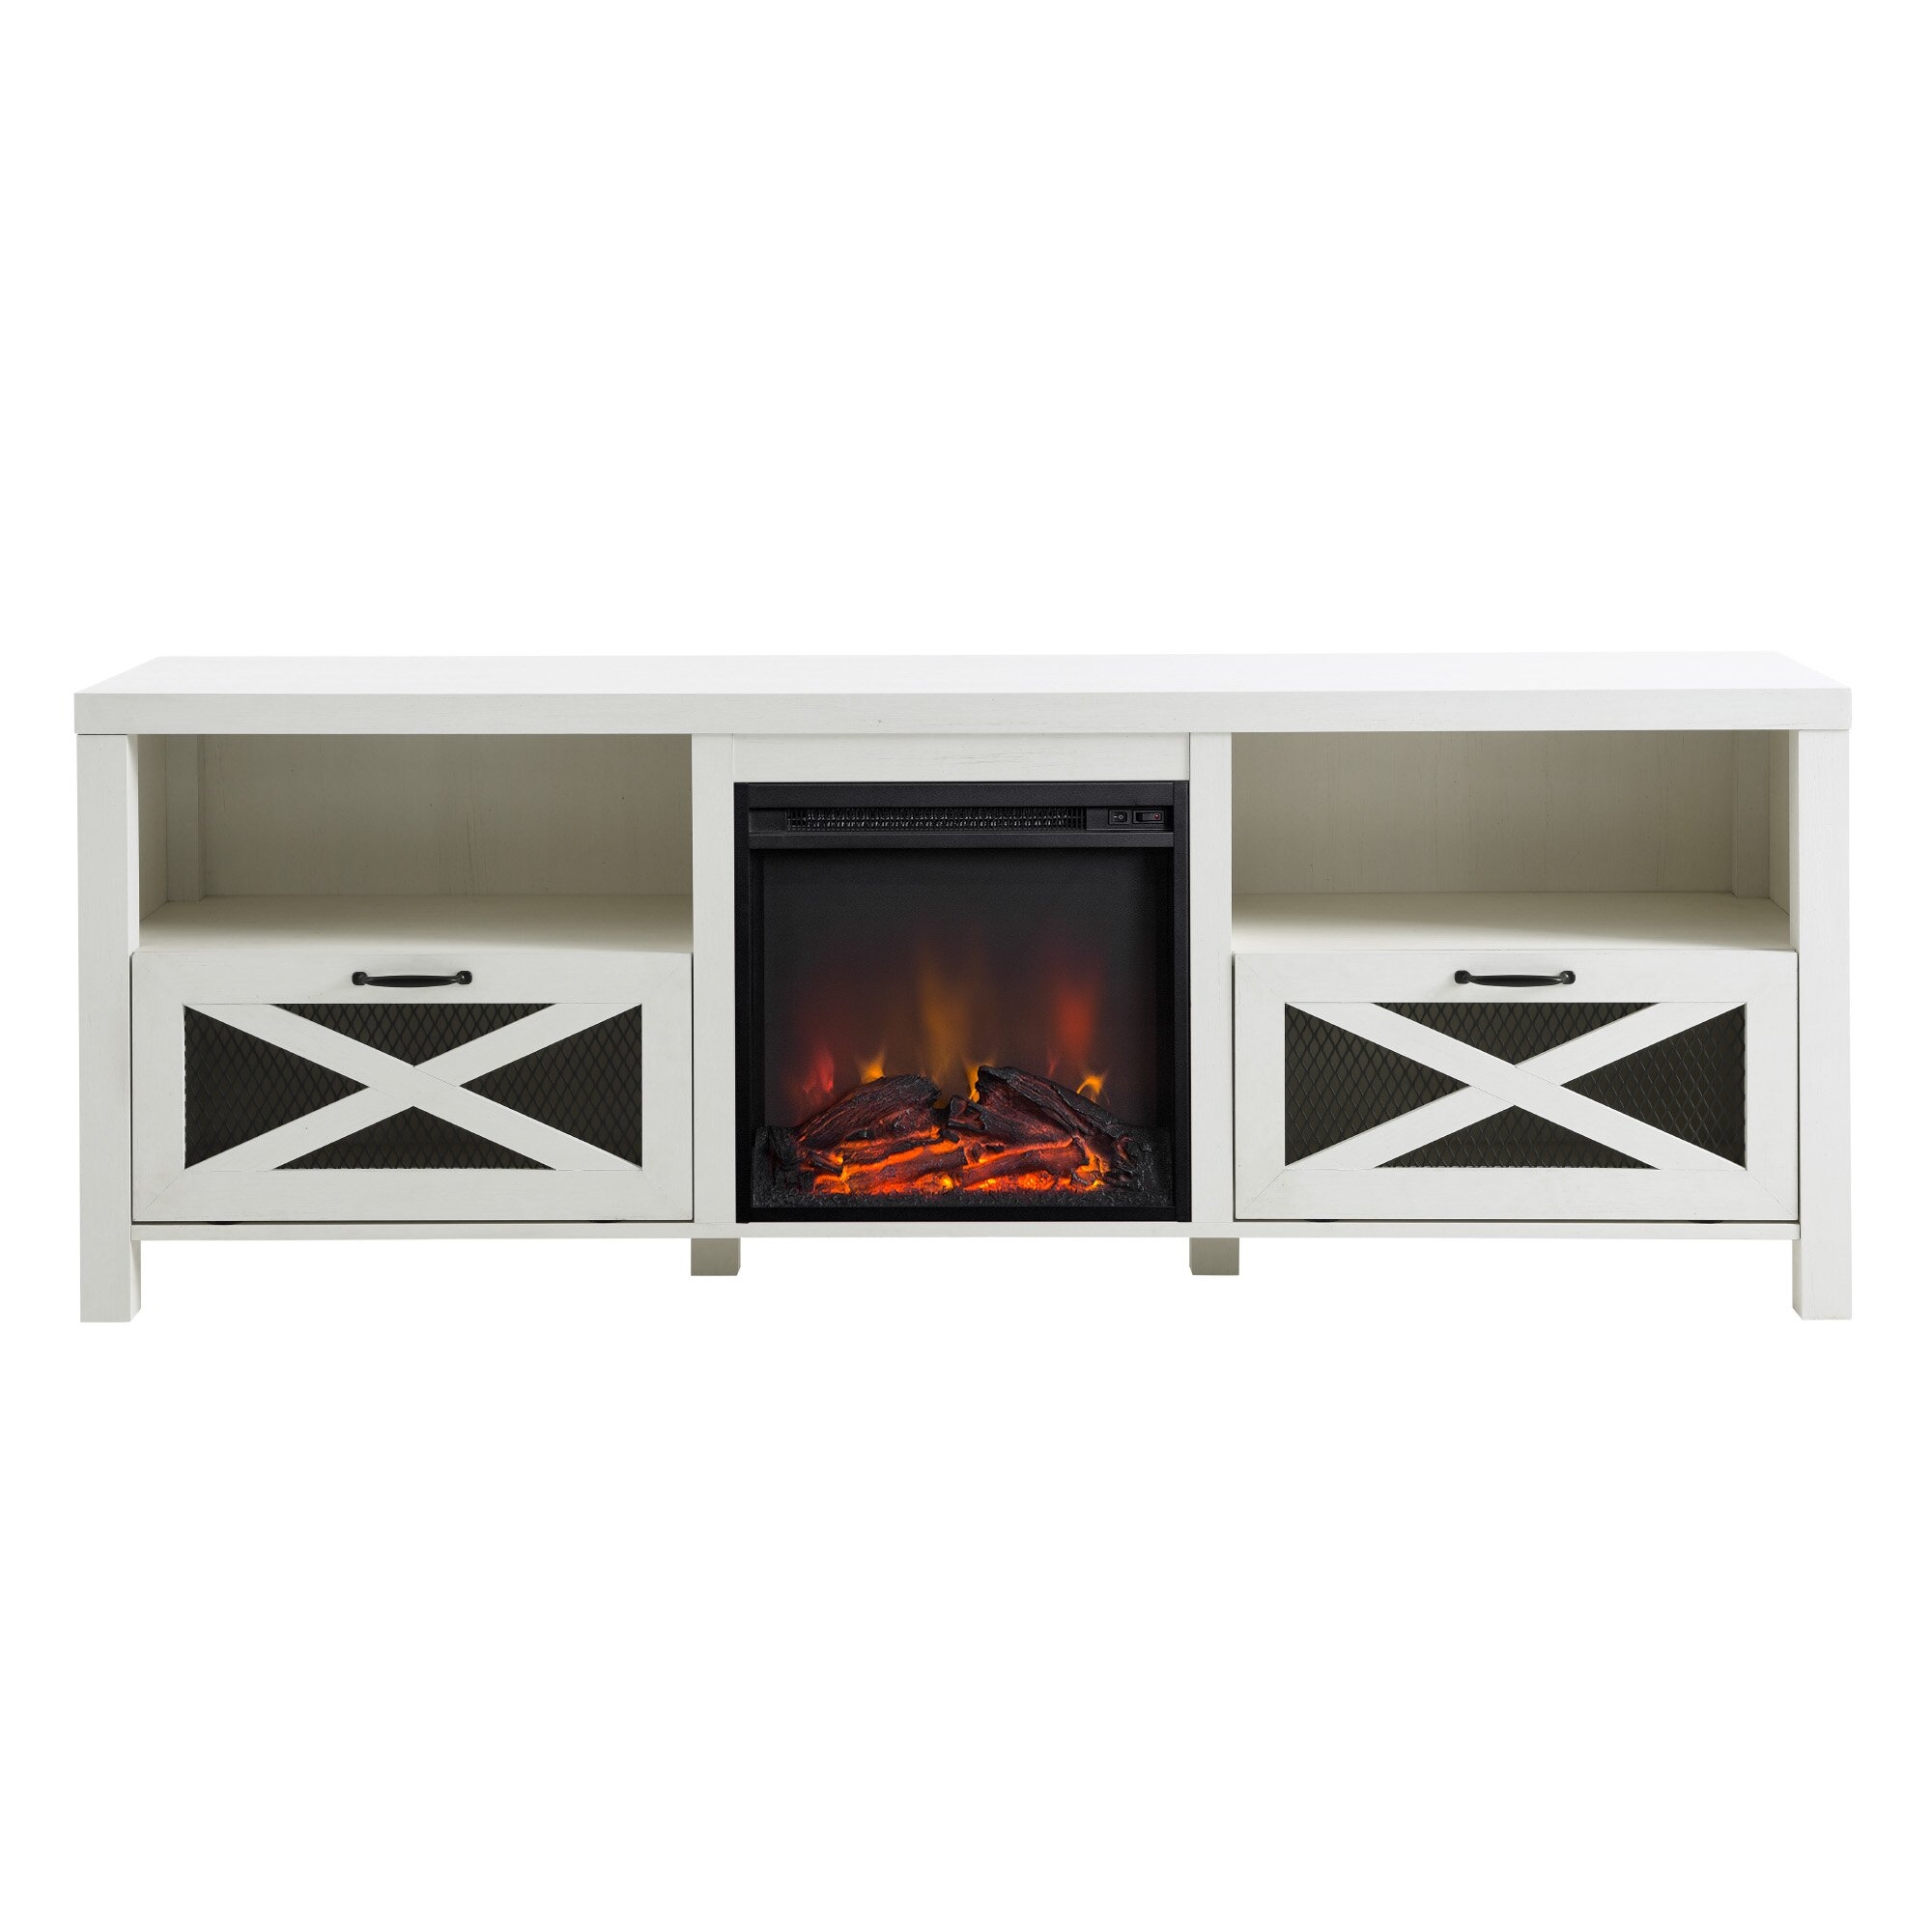 Tansey TV Stand for TVs up to 78" with Fireplace Included - Image 3